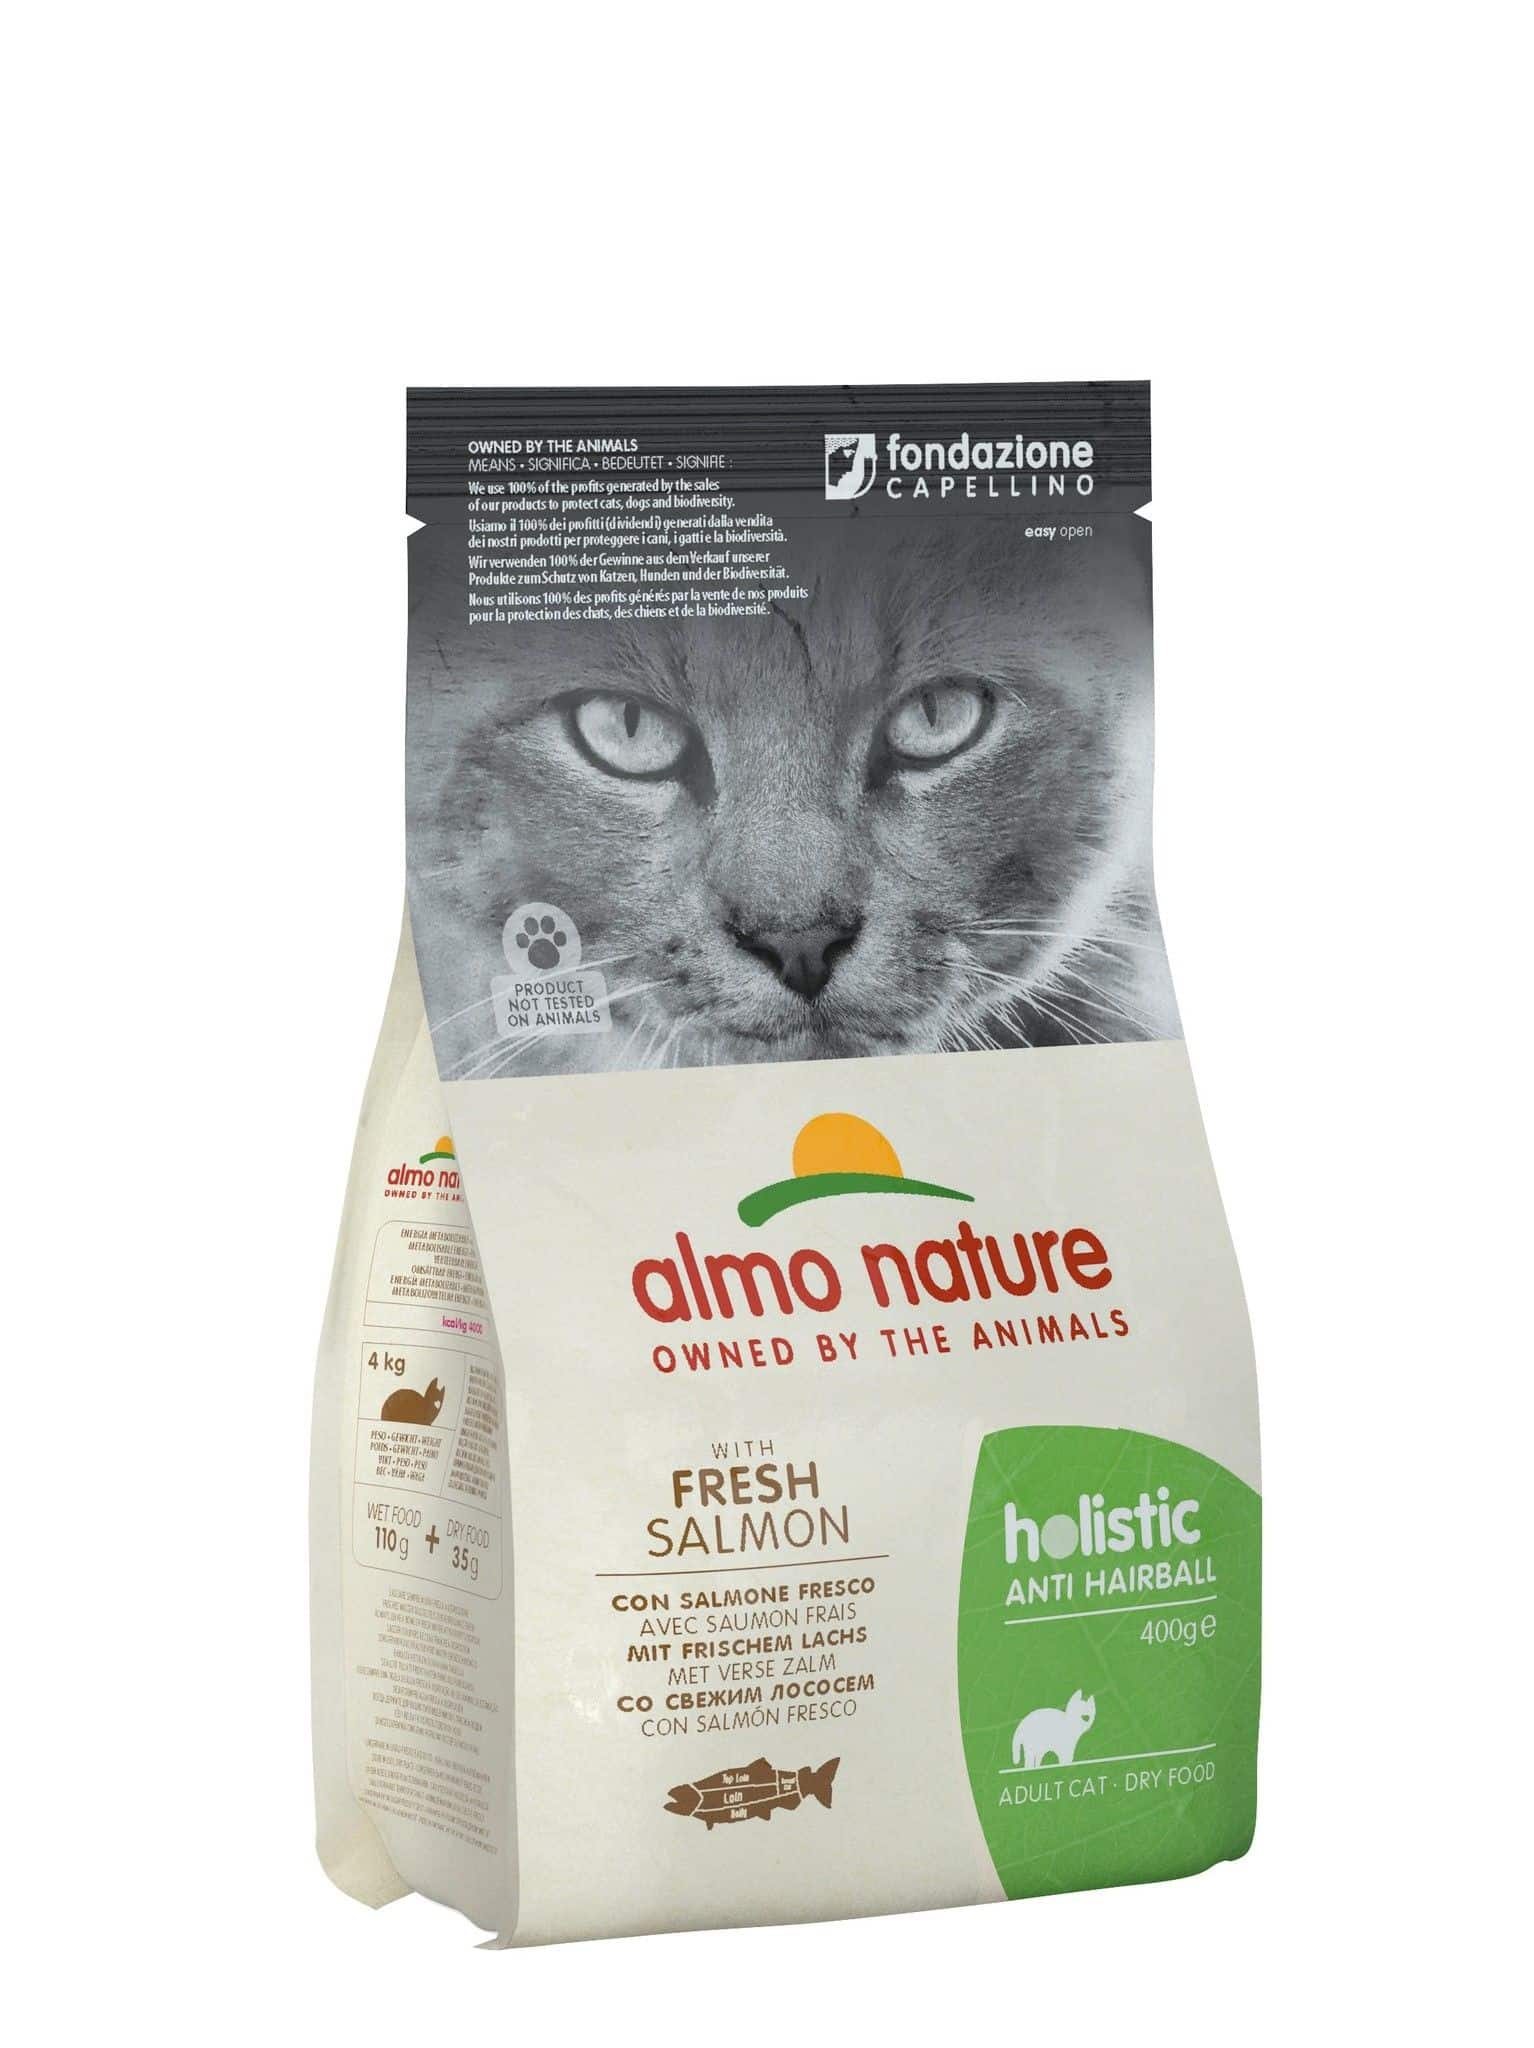 Almo Nature Kat Holistic Droogvoer – Anti-hairball – Zalm 400g